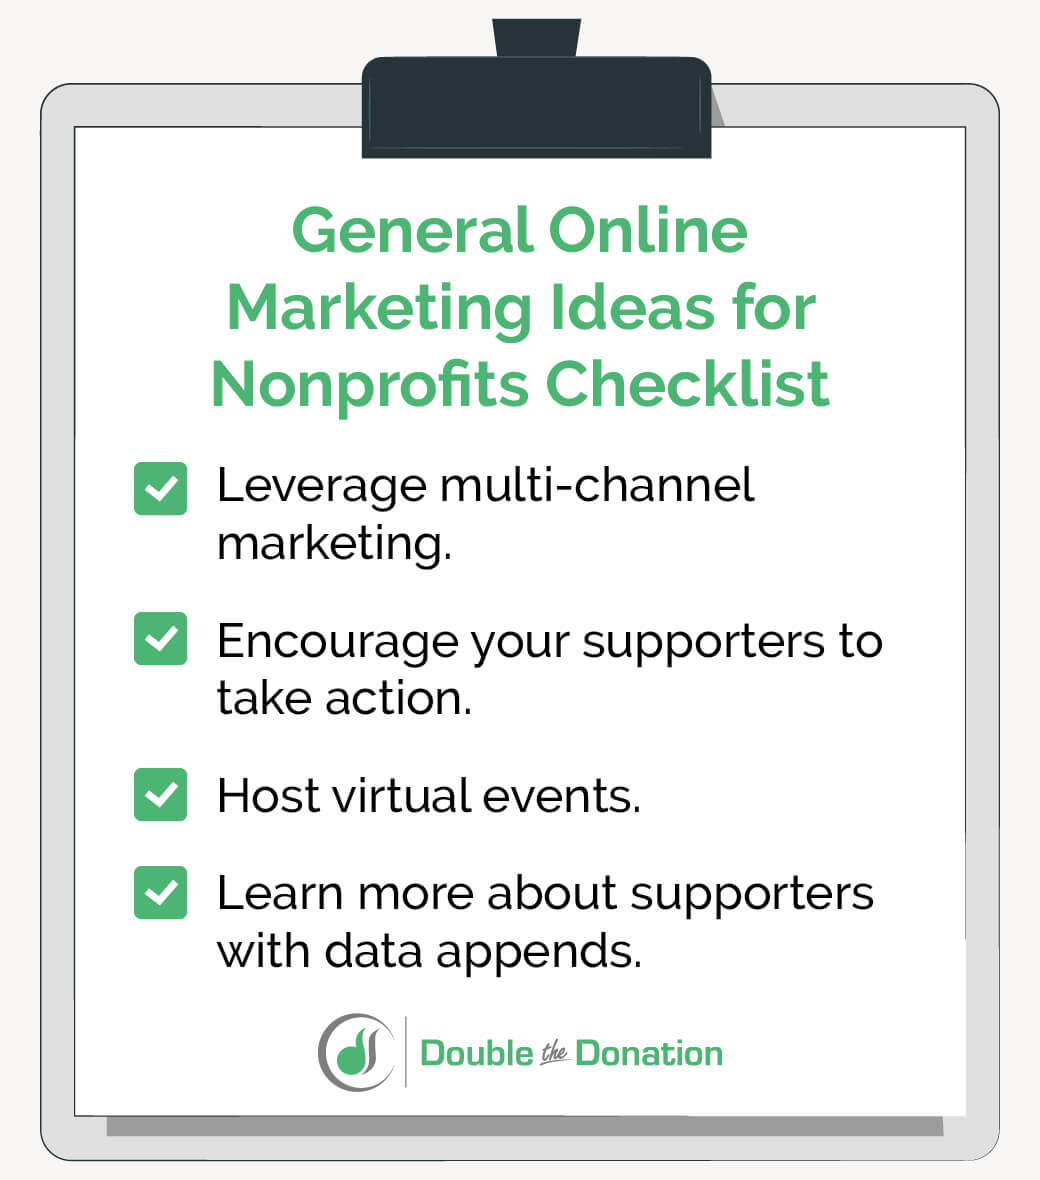 Check out these general marketing ideas for nonprofits leveraging technology.